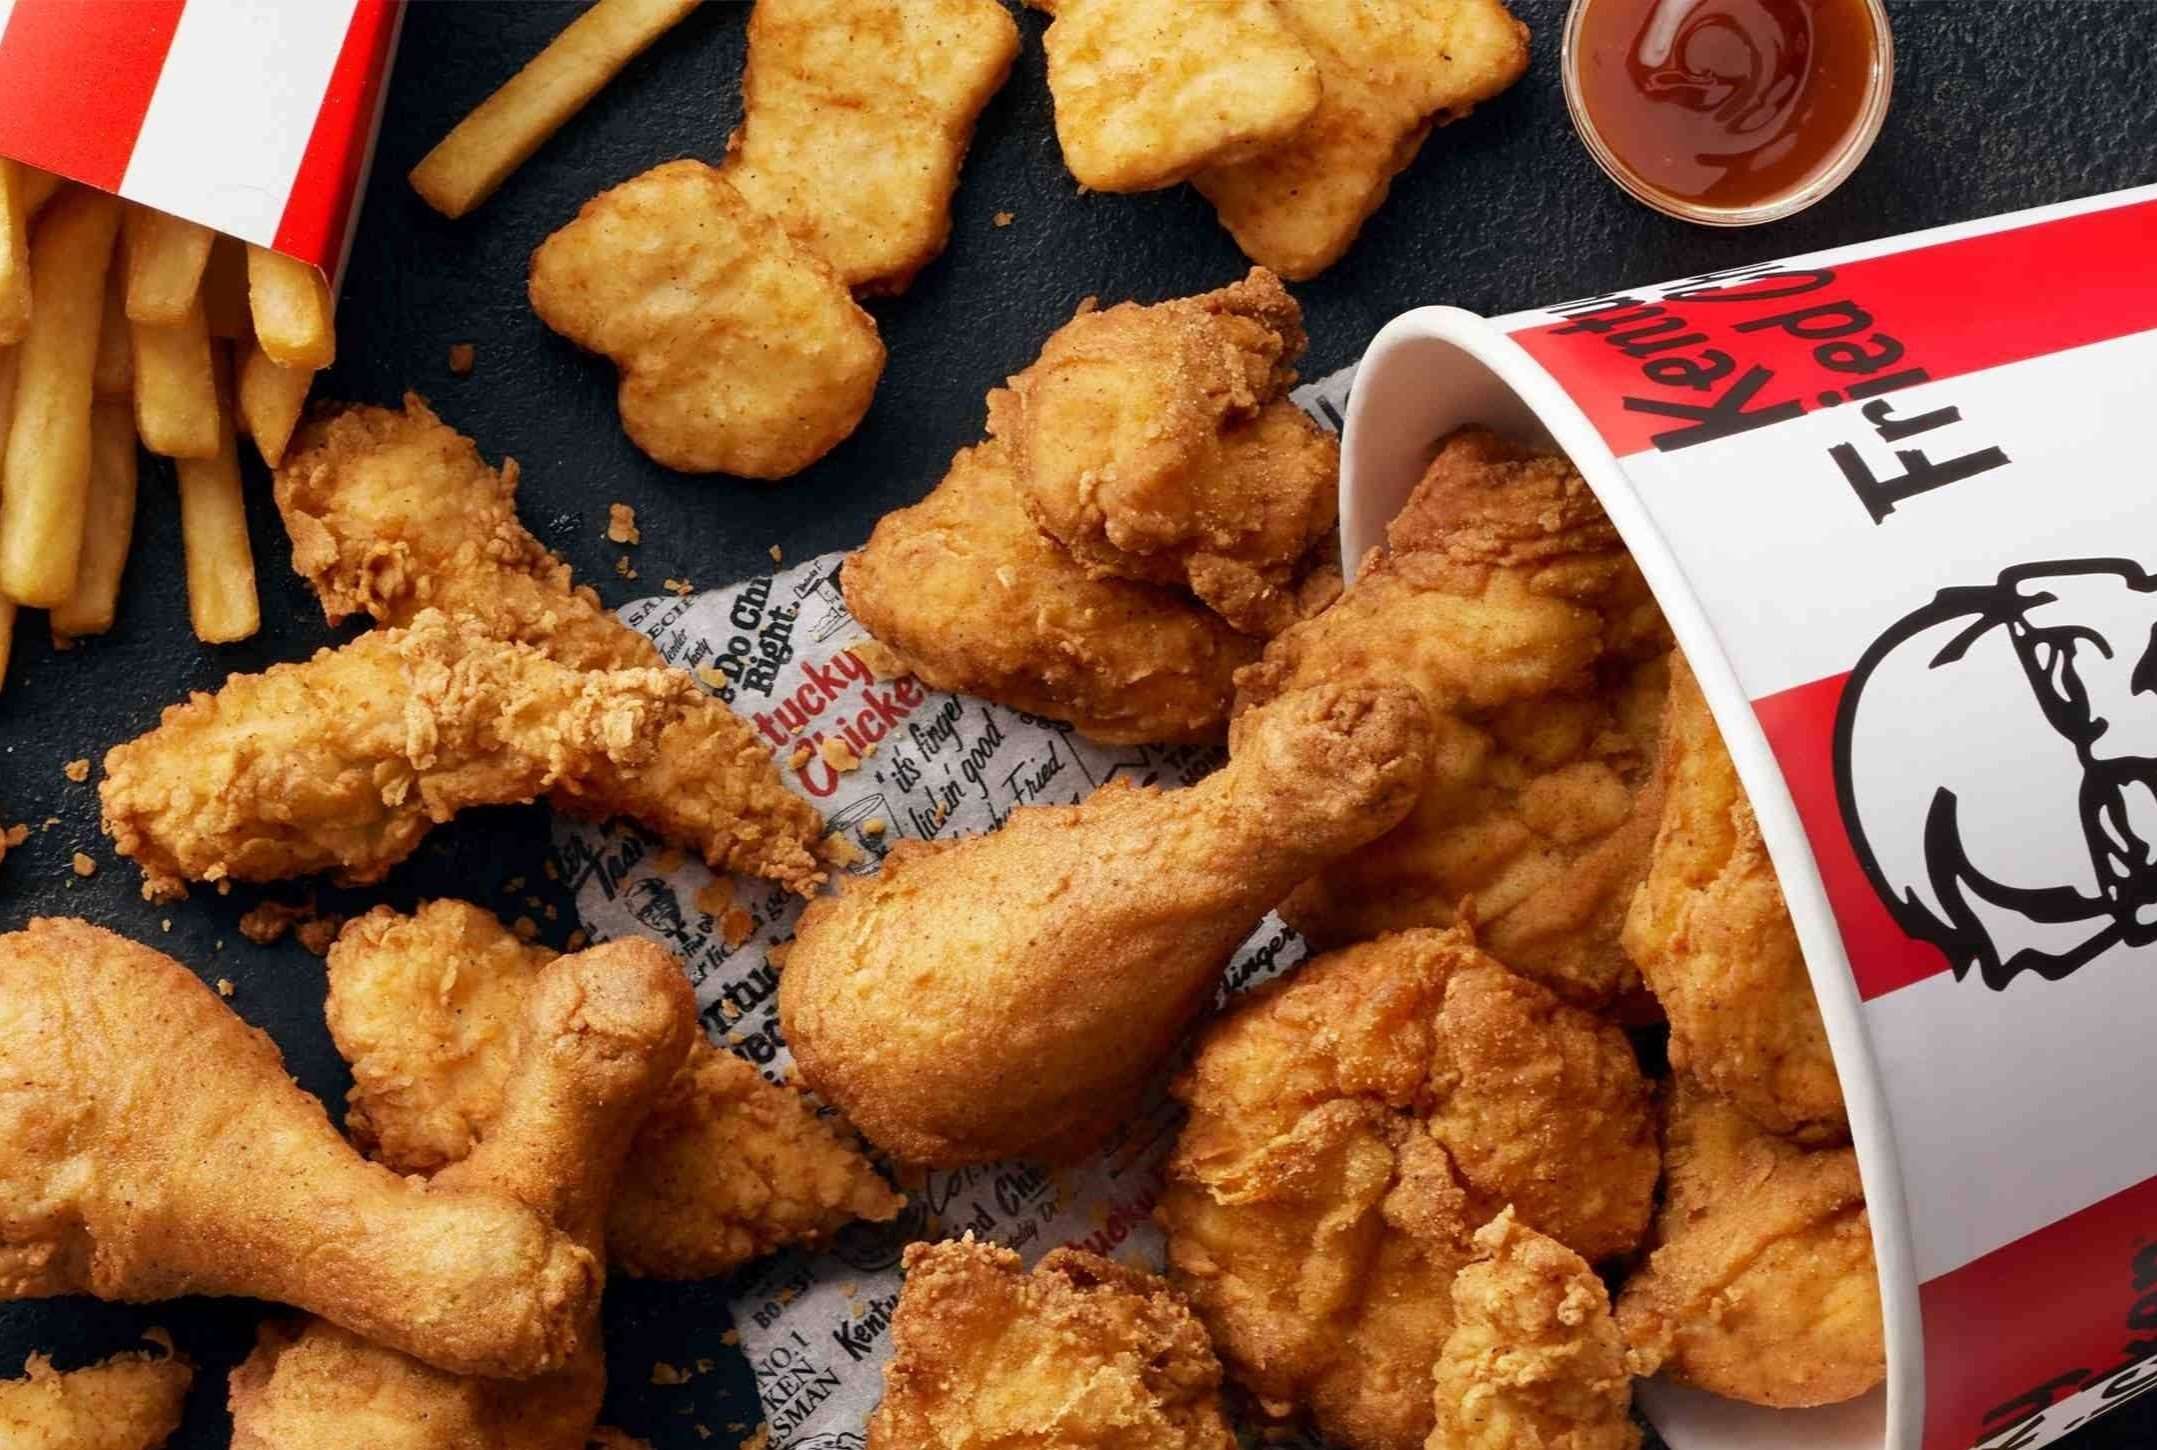 Discover KFC's Mouthwatering Breakfast Hours!